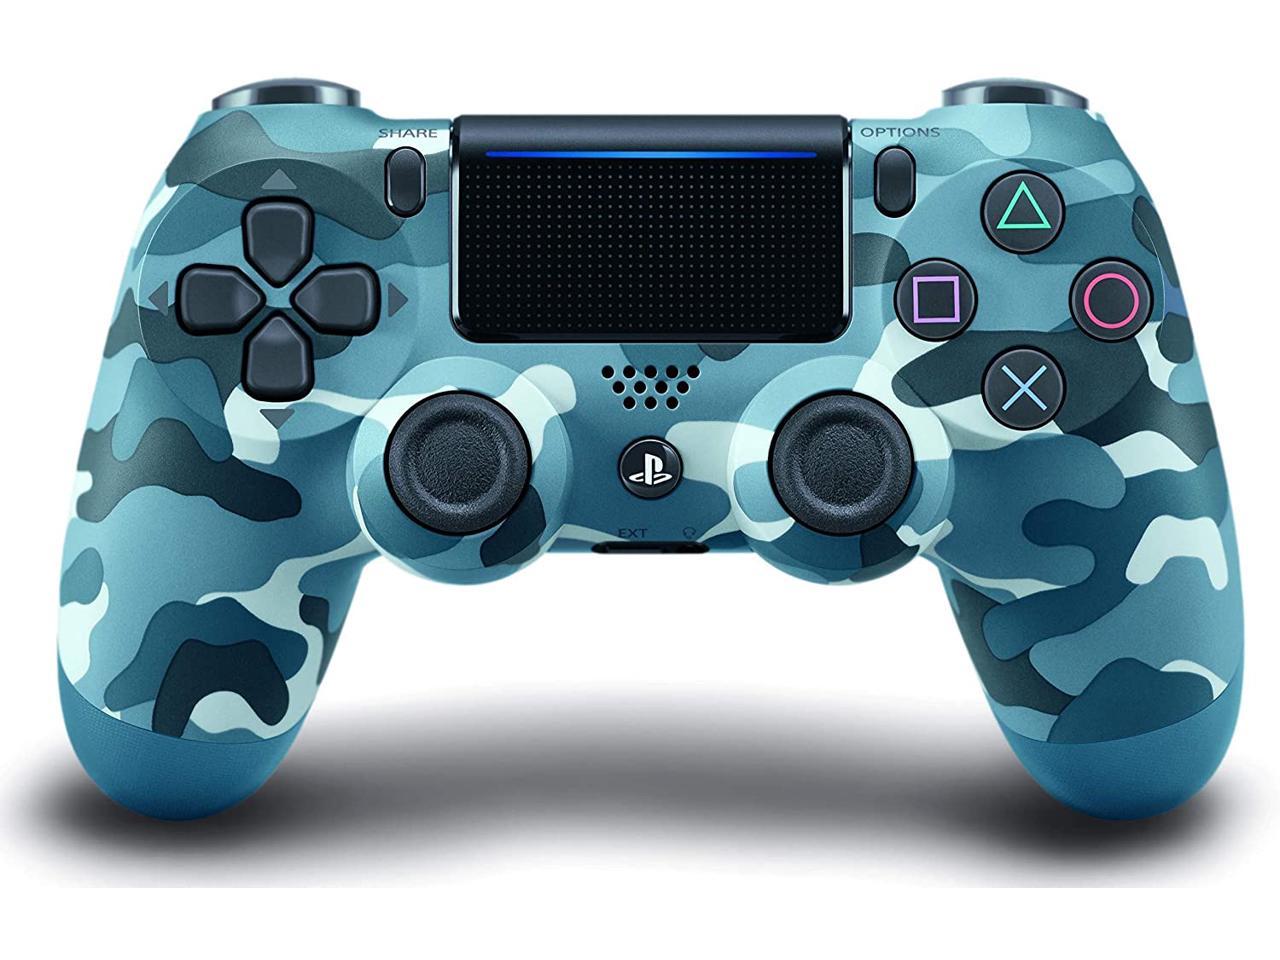 PS4 Wireless Controller Game Pad for SONY PlayStation 4 Dualshock - Blue Camouflage,Hot PS4 Wireless Controller Game Pad for SONY PlayStation Dualshock 4 Camouflage